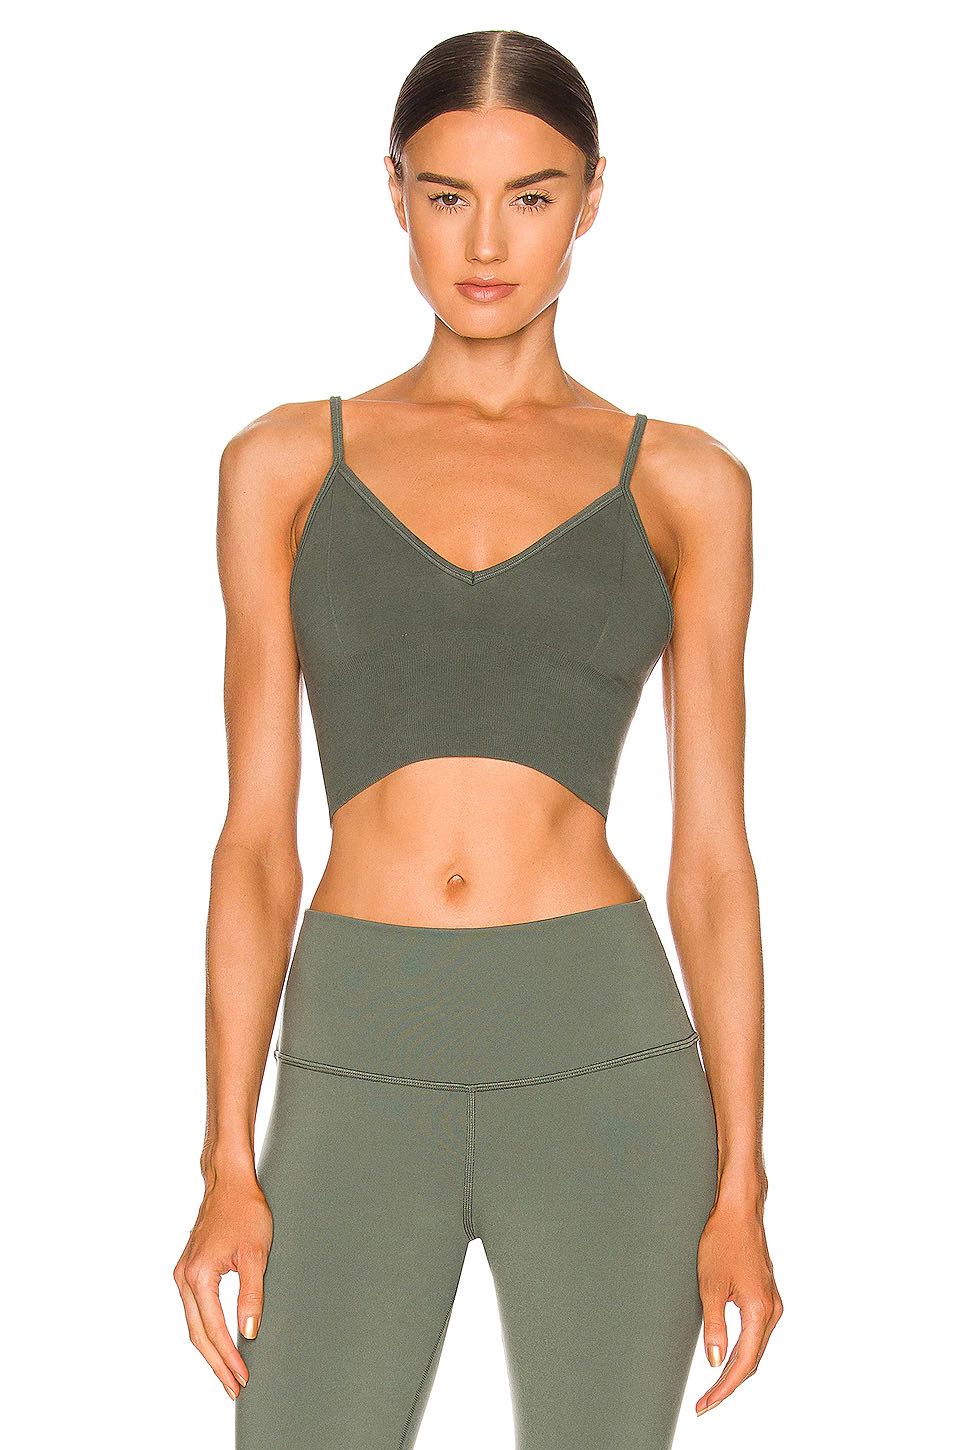  Hot Yoga Clothes For Women